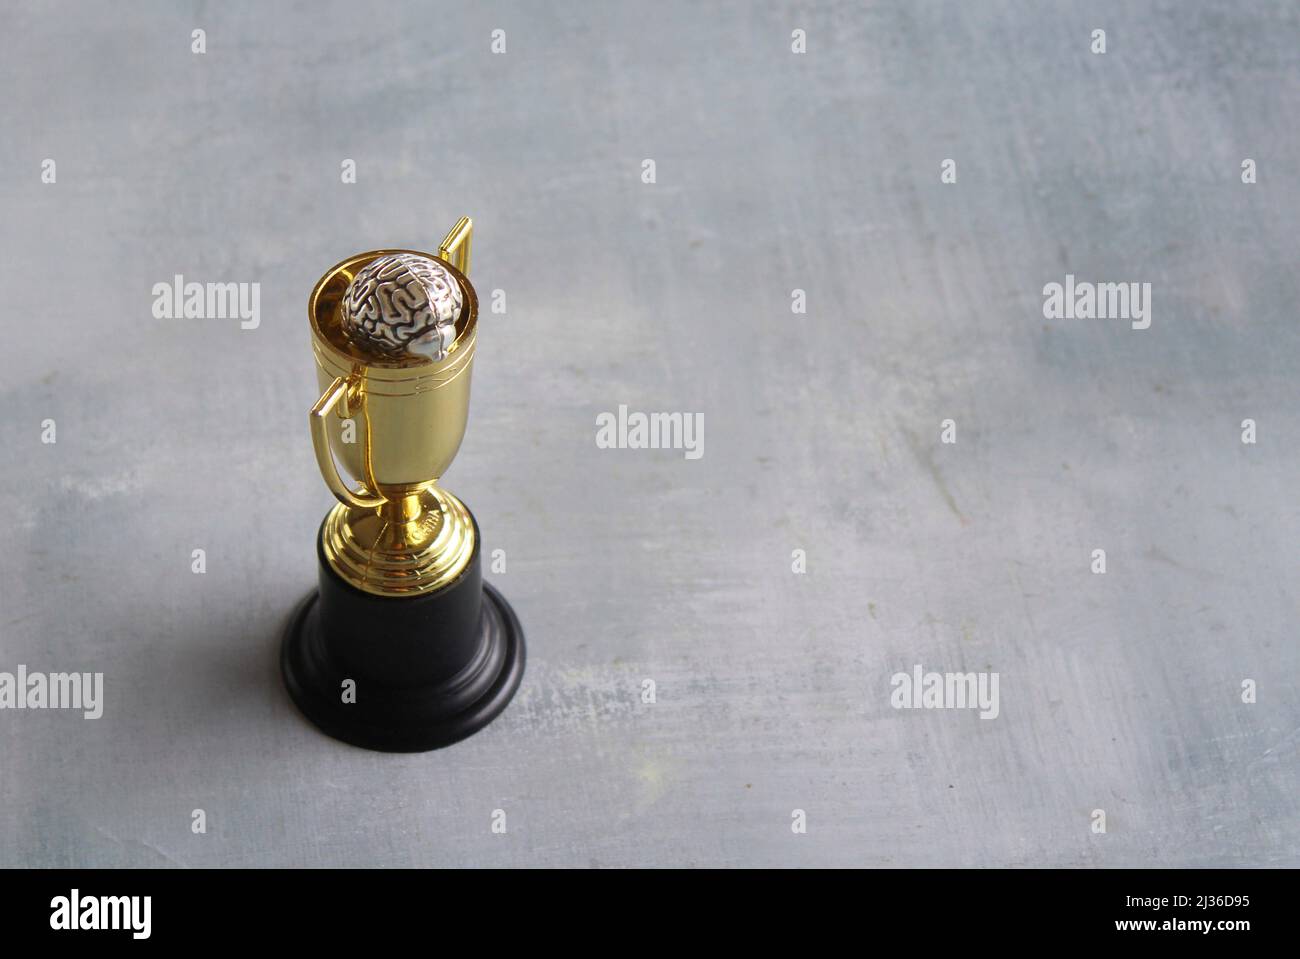 Brain inside gold cup trophy with copy space. Winning mentality and mindset concept. Stock Photo